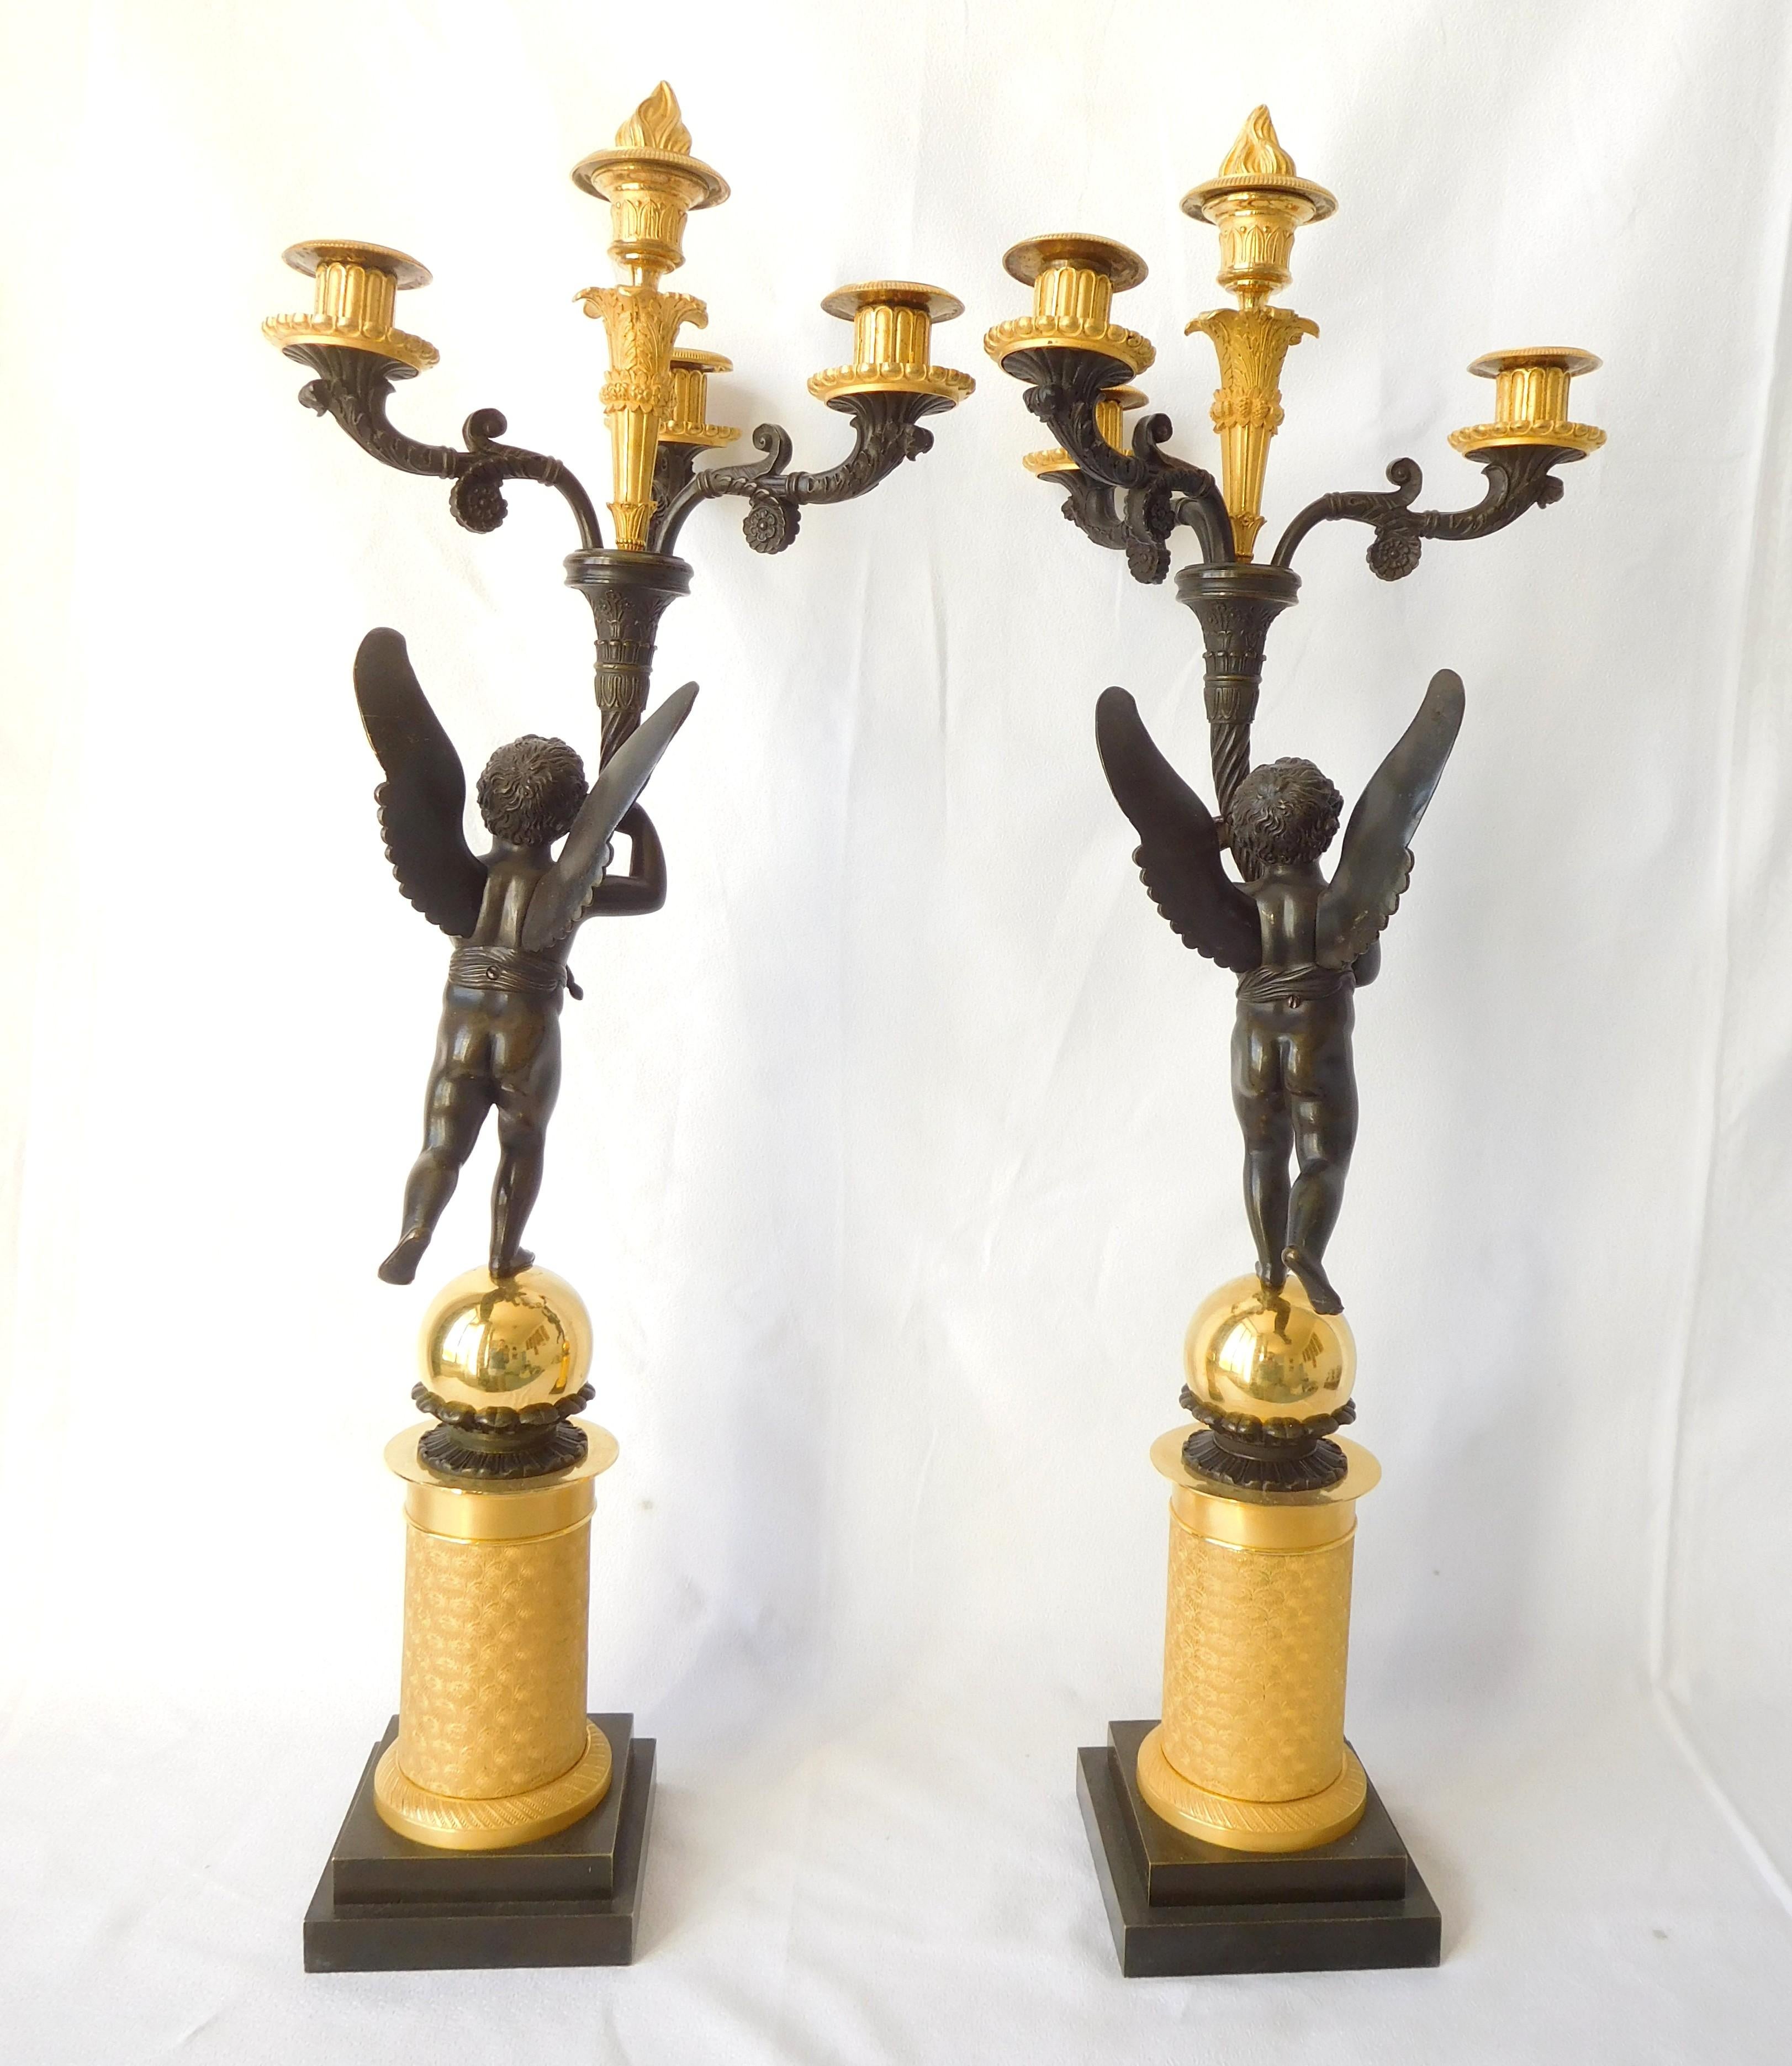 Pair of tall ormolu (mercury gilt bronze) and patinated bronze candelabras, French Empire production, early 19th century circa 1815 - 1820.
Tall 4-lights model held by winged putti standing on a finely chiseled ormolu column-shaped base. This